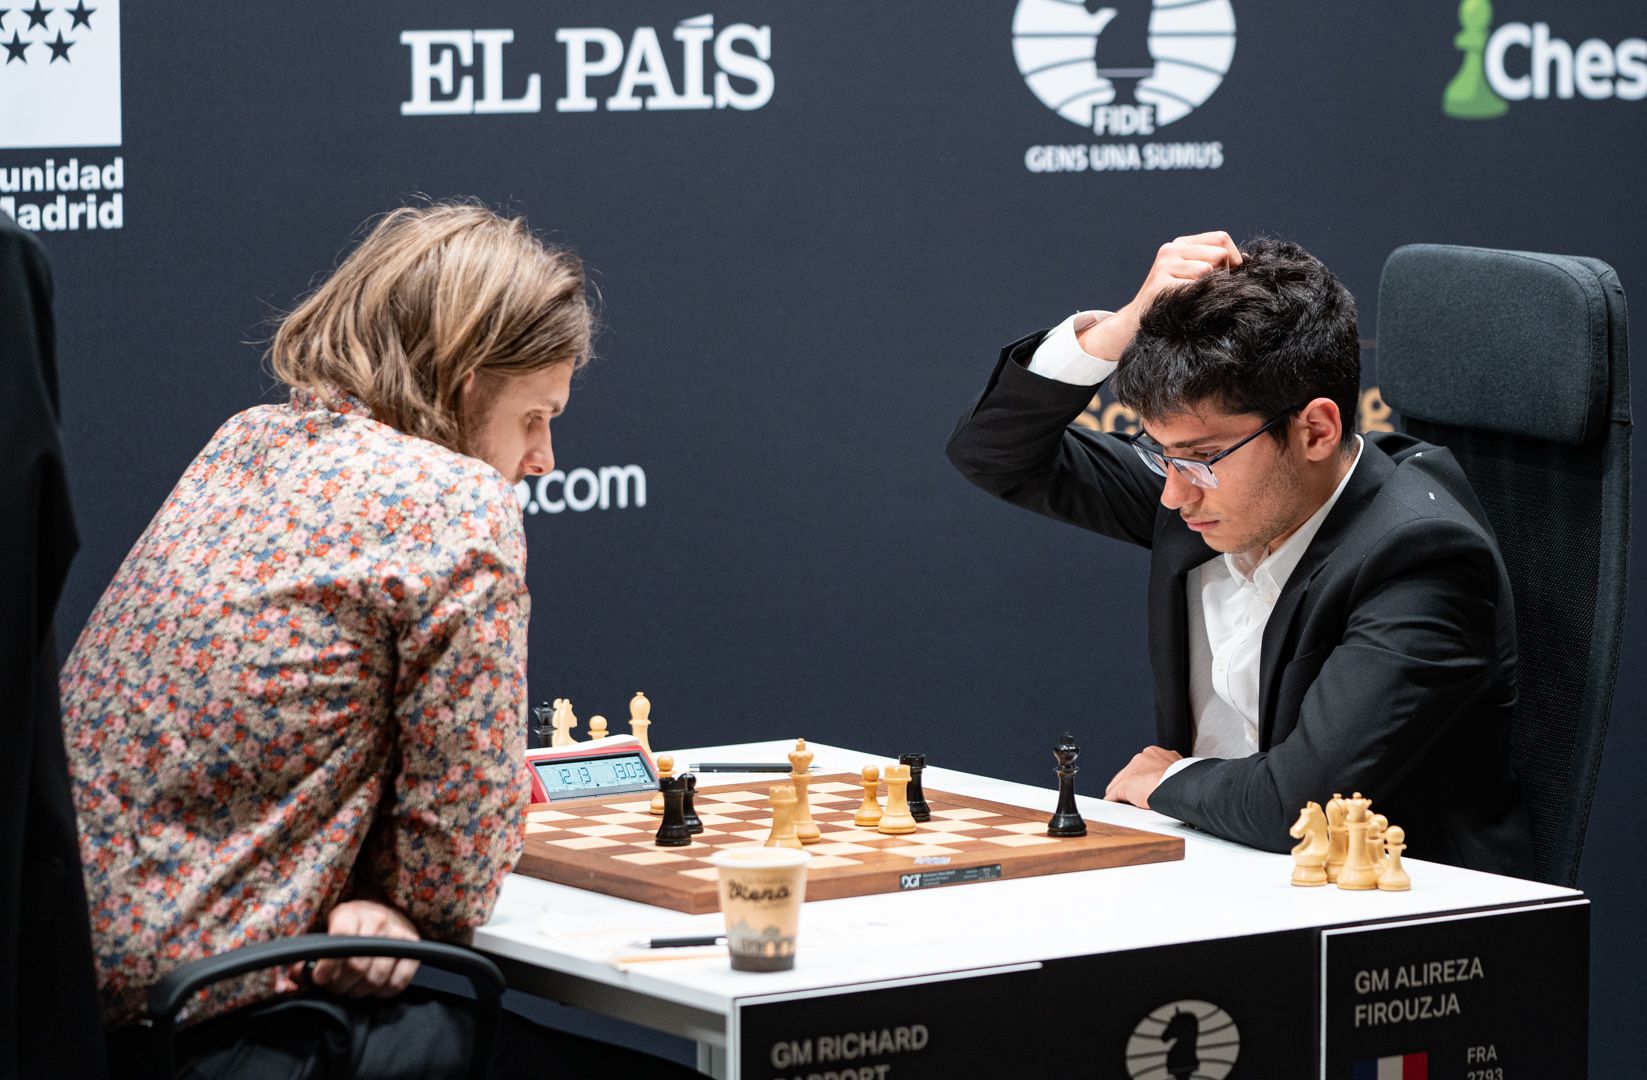 Today in Chess, FIDE Candidates Round 2 Recap